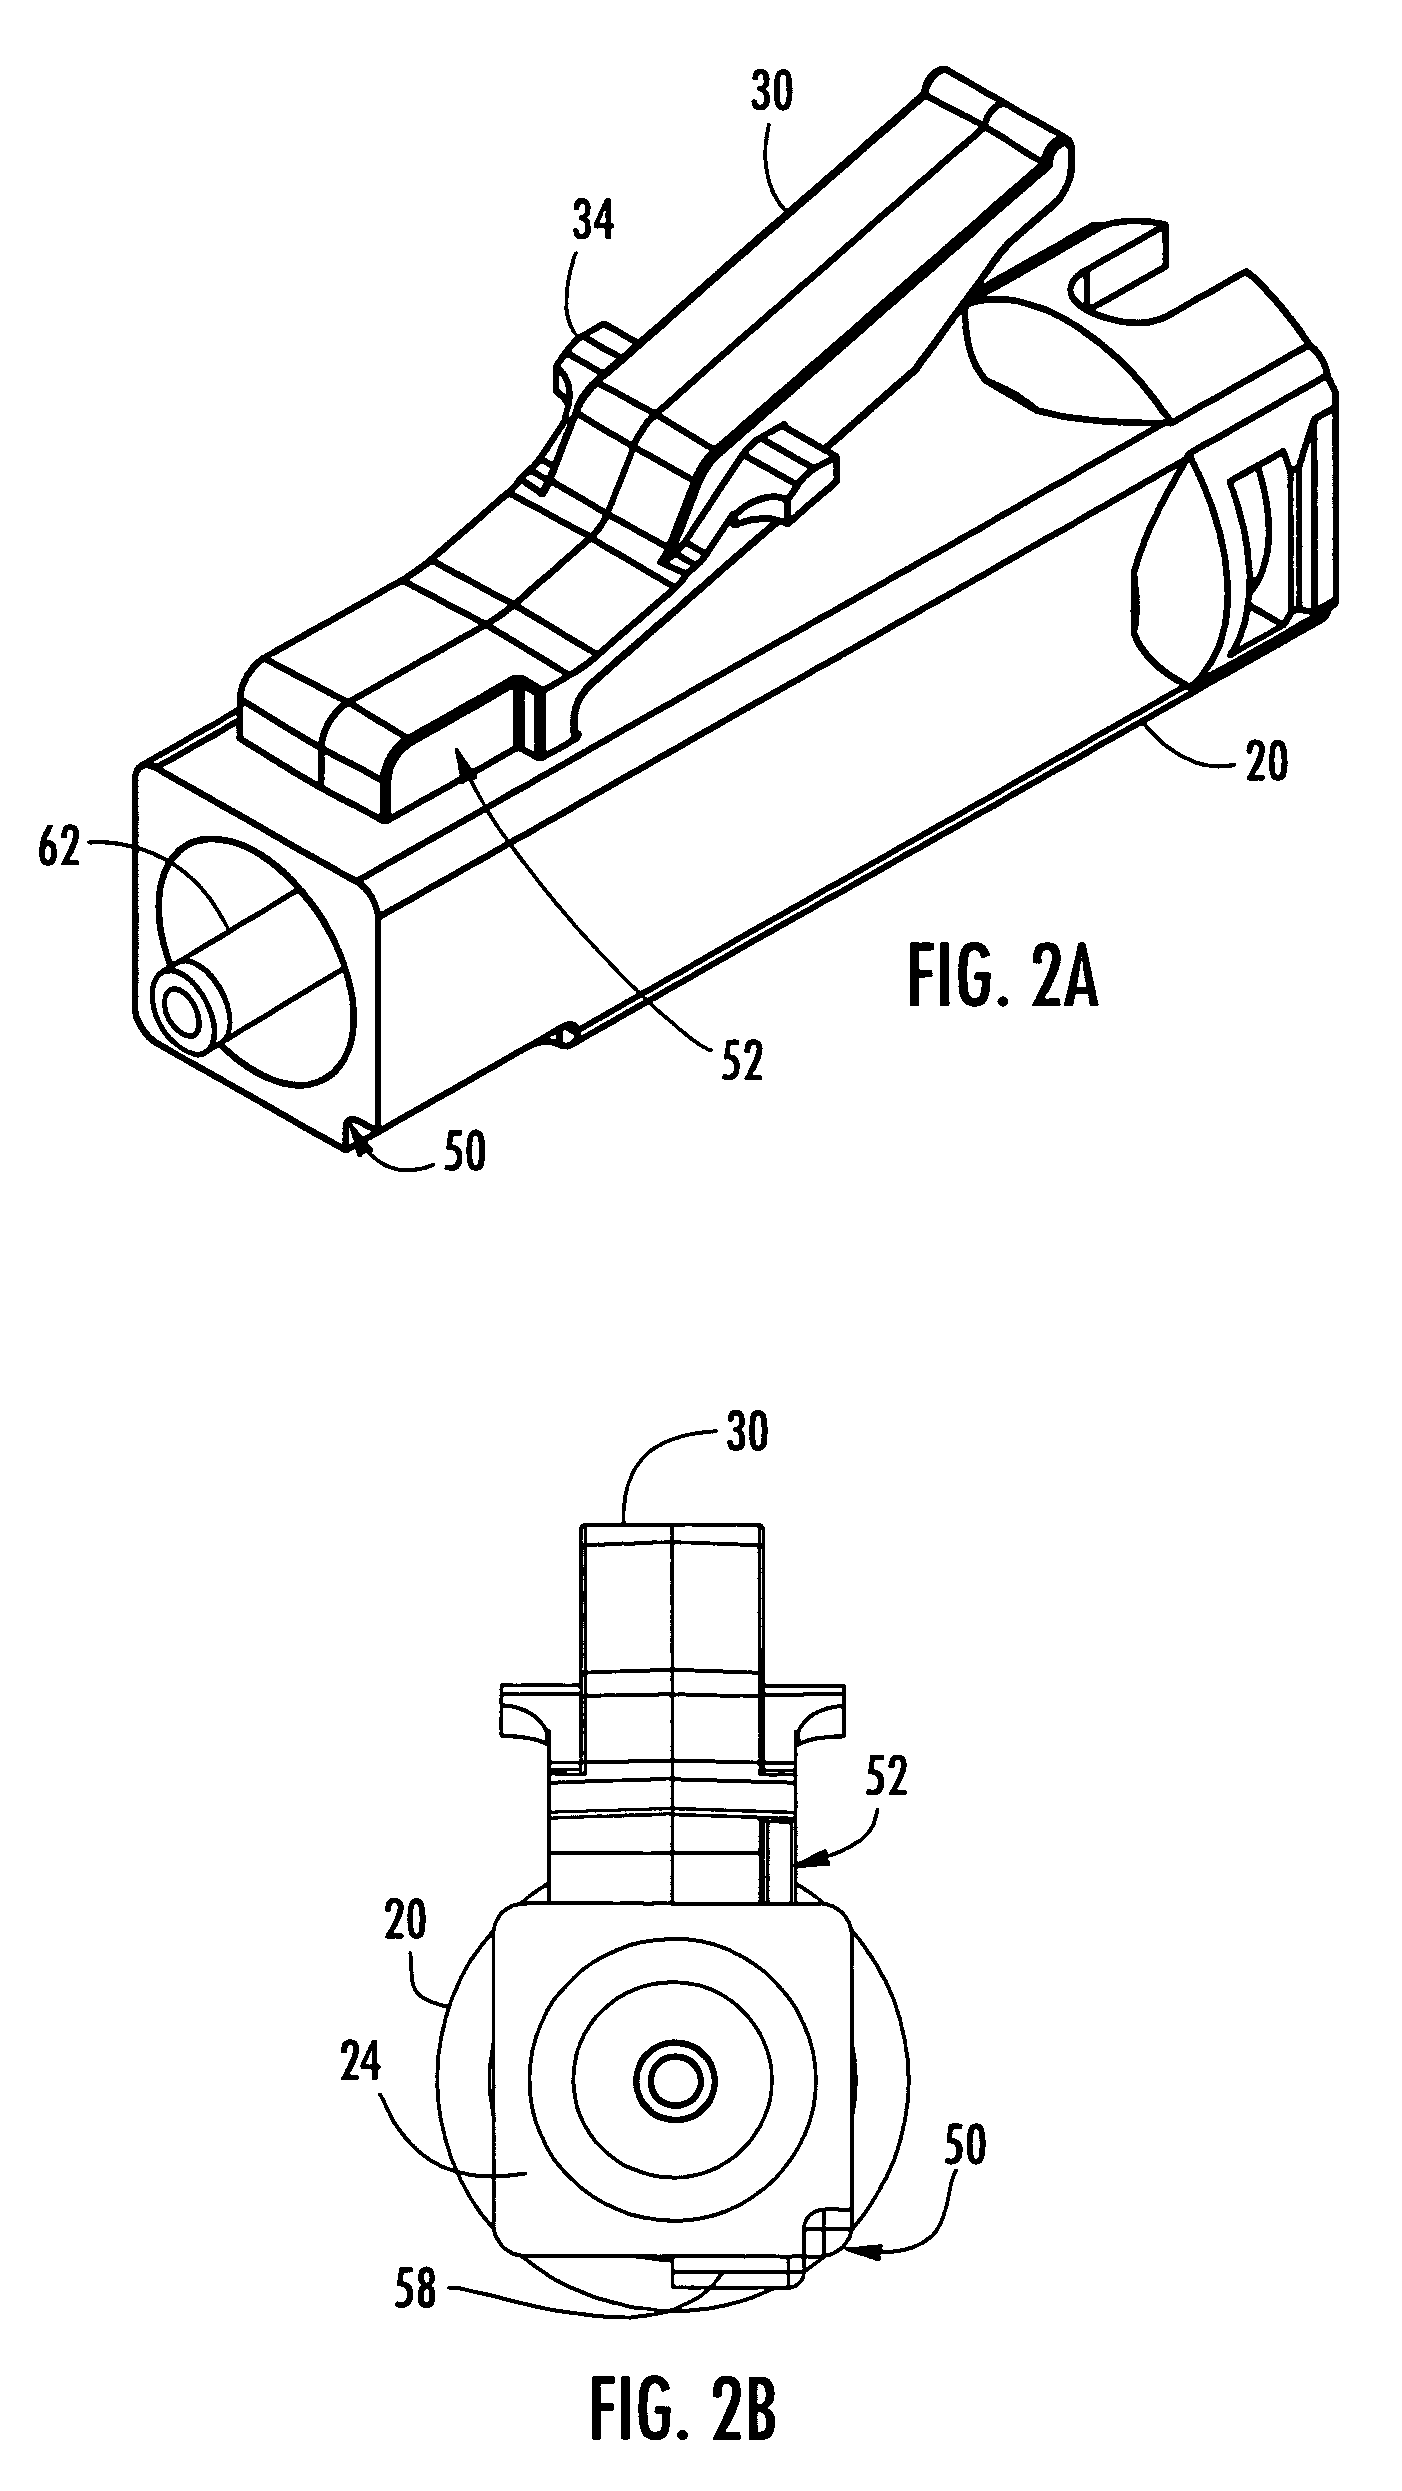 Secure fiber optic connector and adapter systems